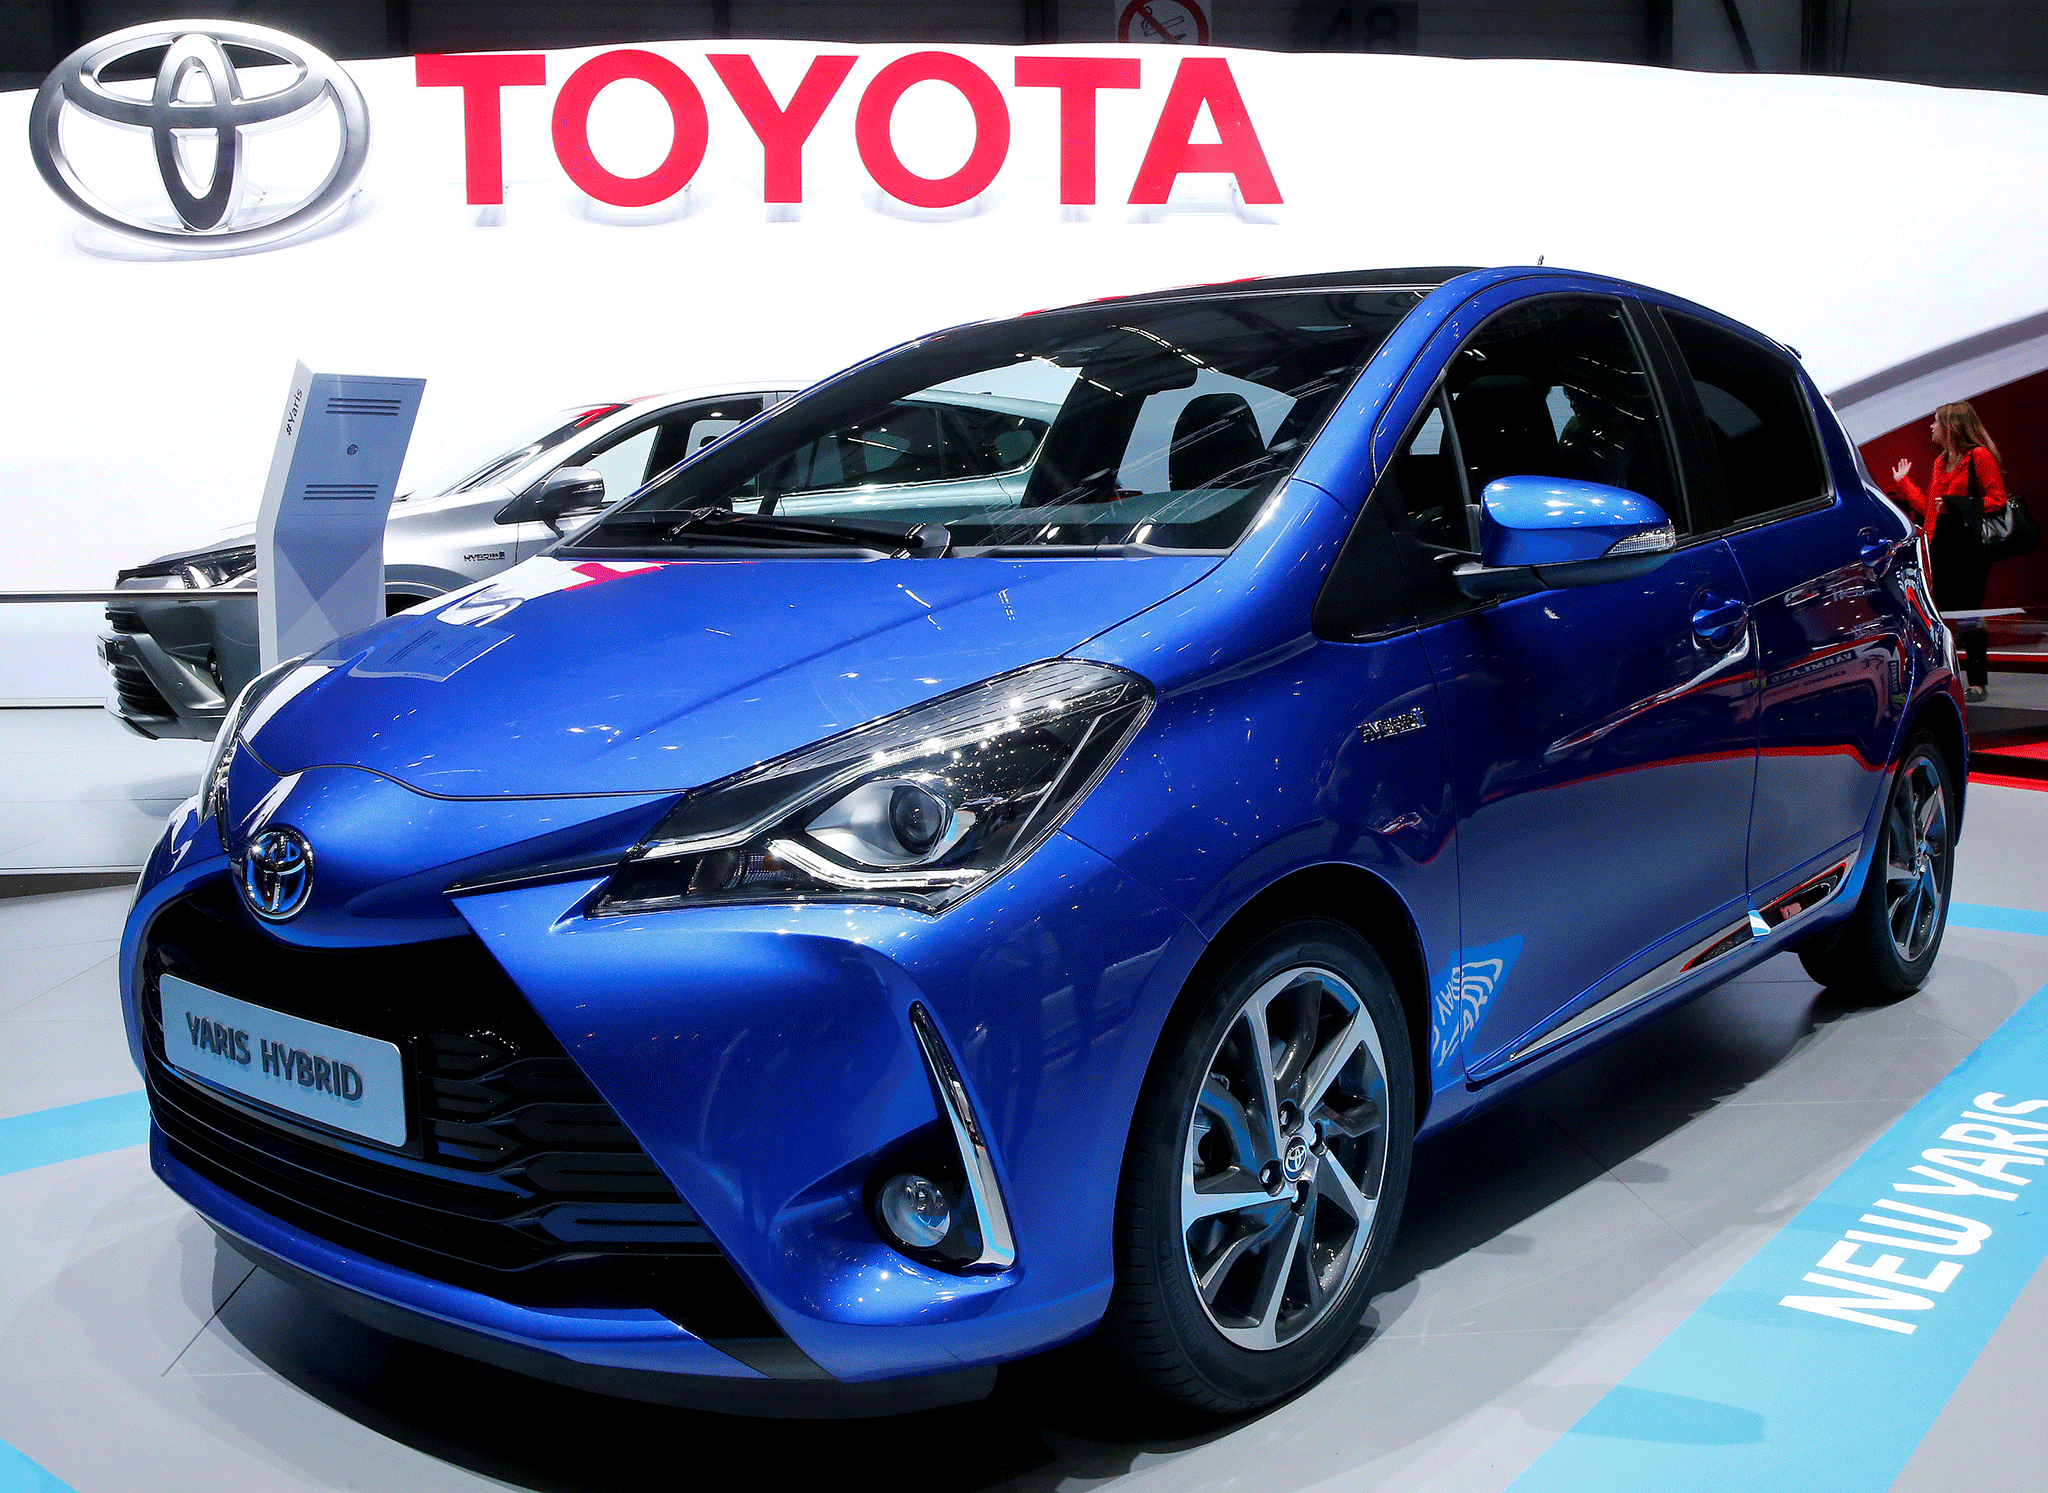 Toyota may wait to see the outcome of Brexit negotiations before committing to UK investment